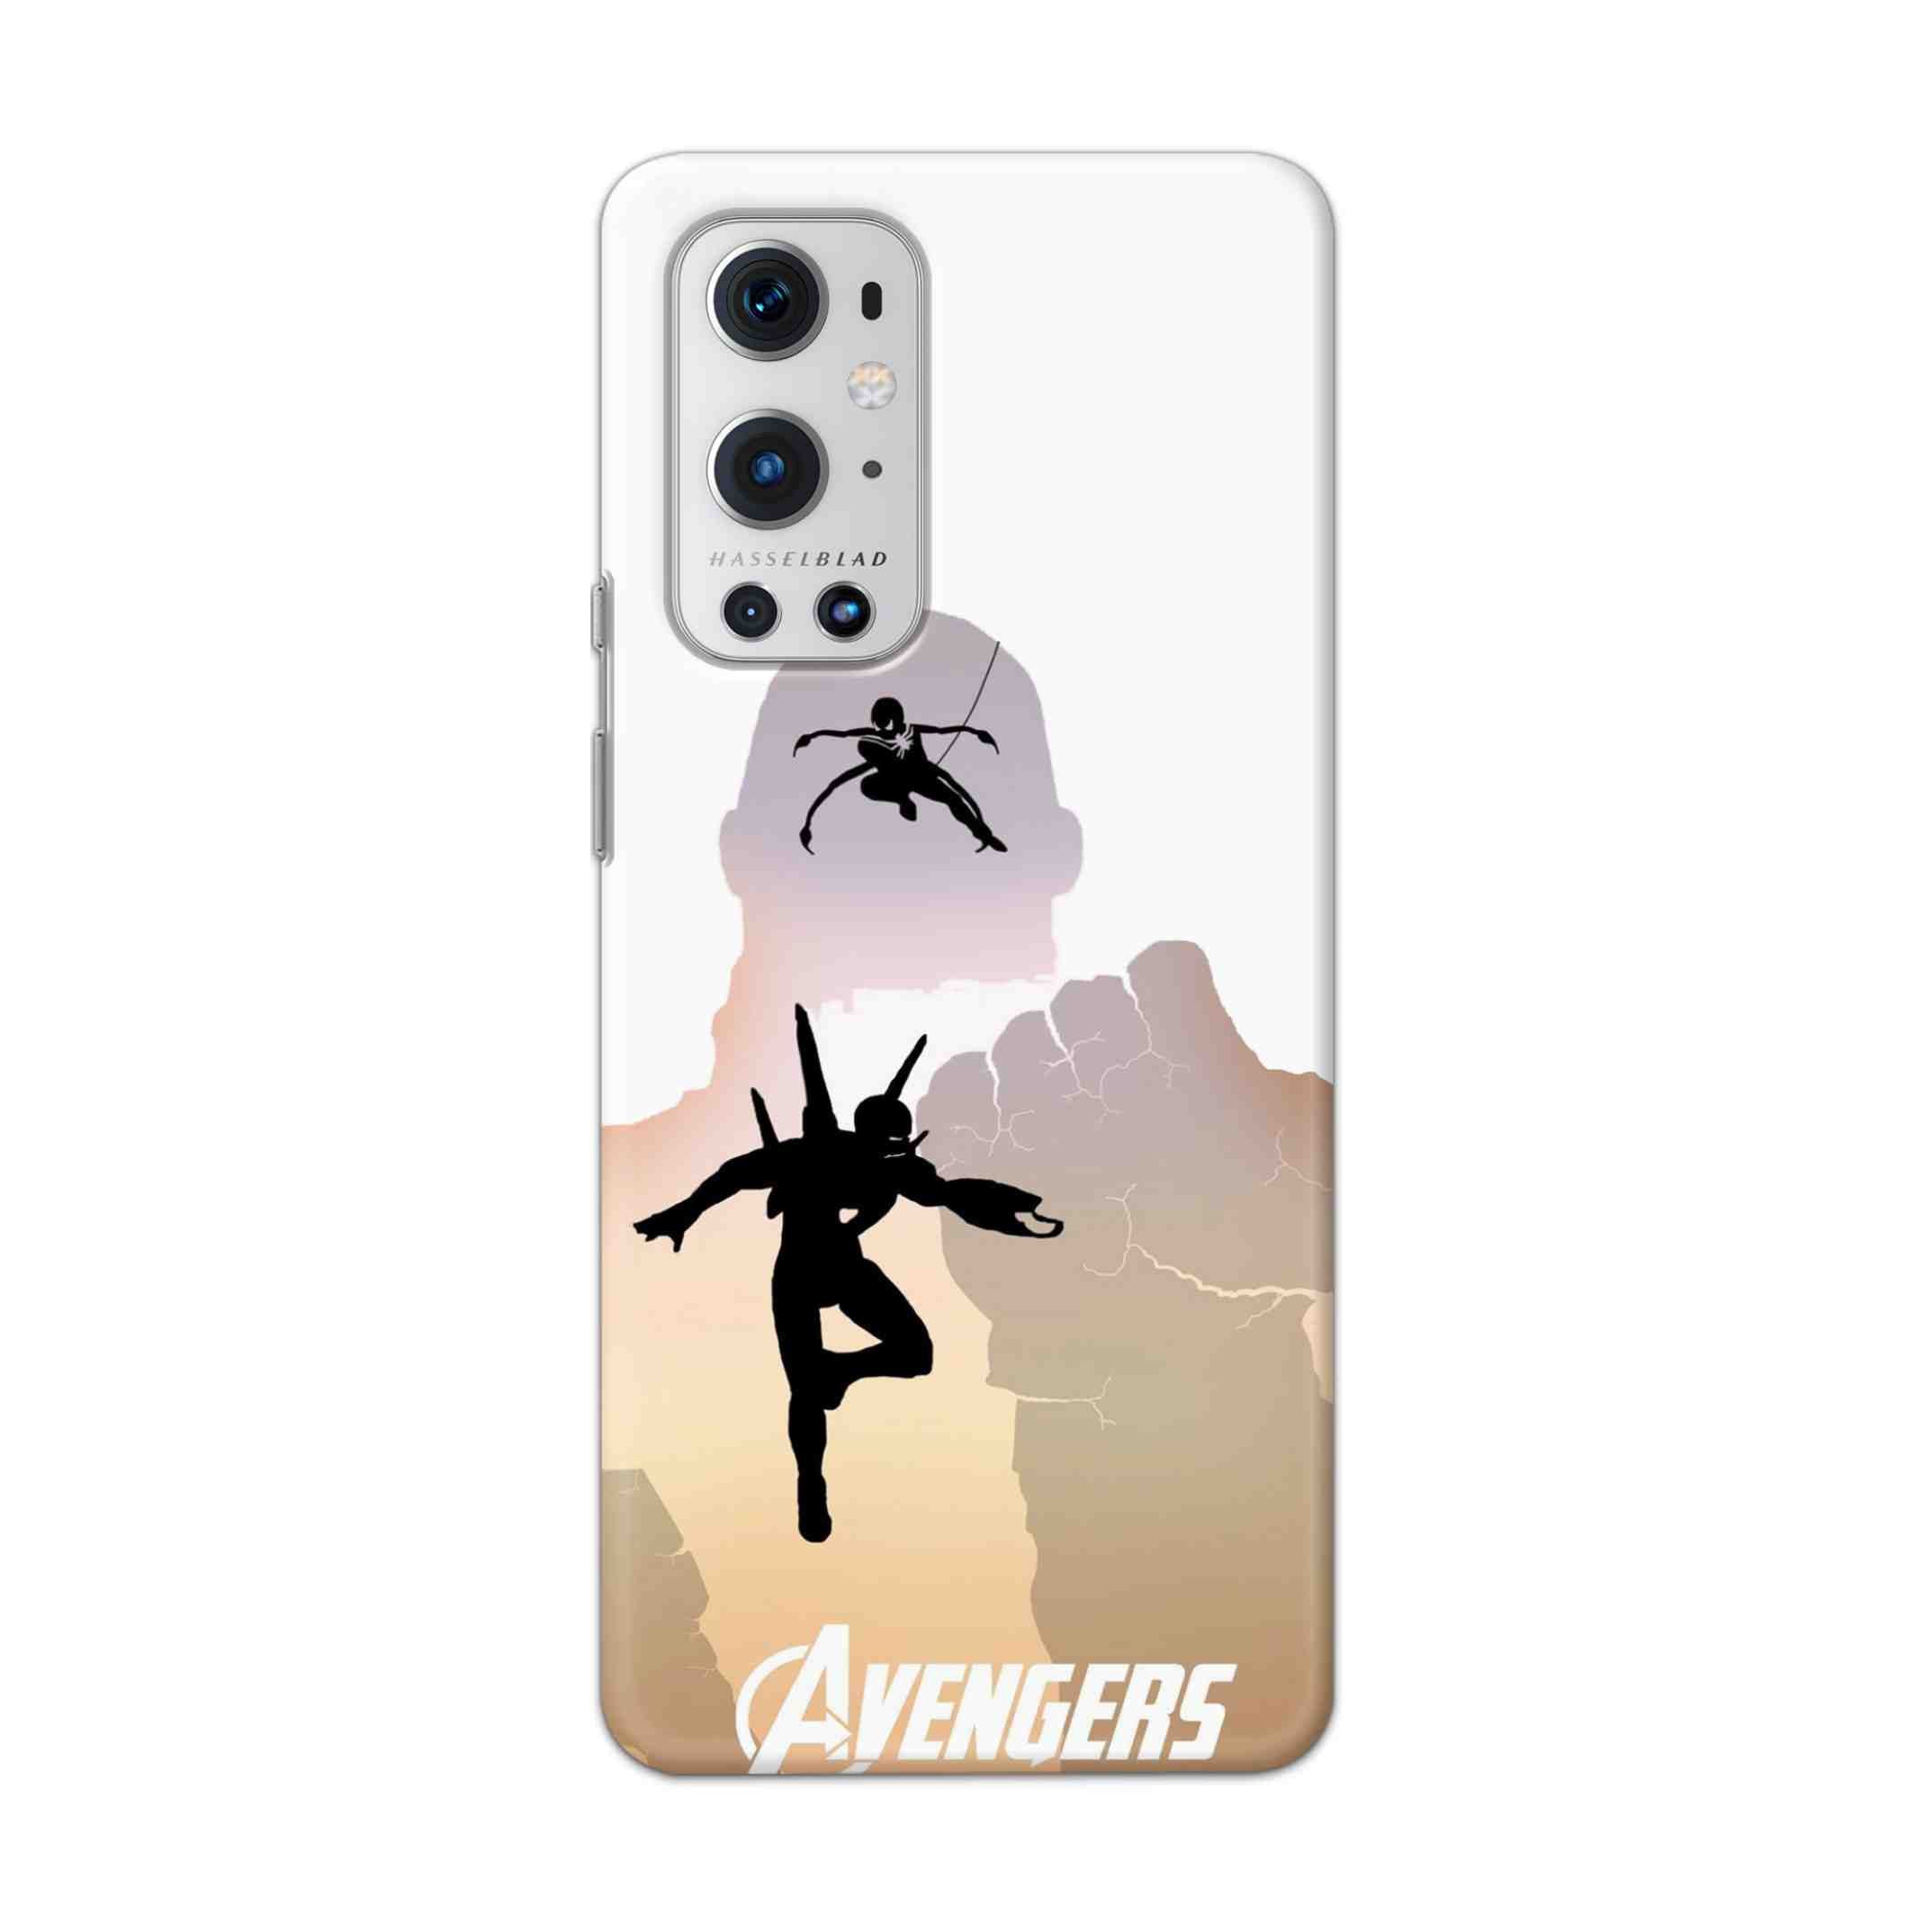 Buy Iron Man Vs Spiderman Hard Back Mobile Phone Case Cover For OnePlus 9 Pro Online